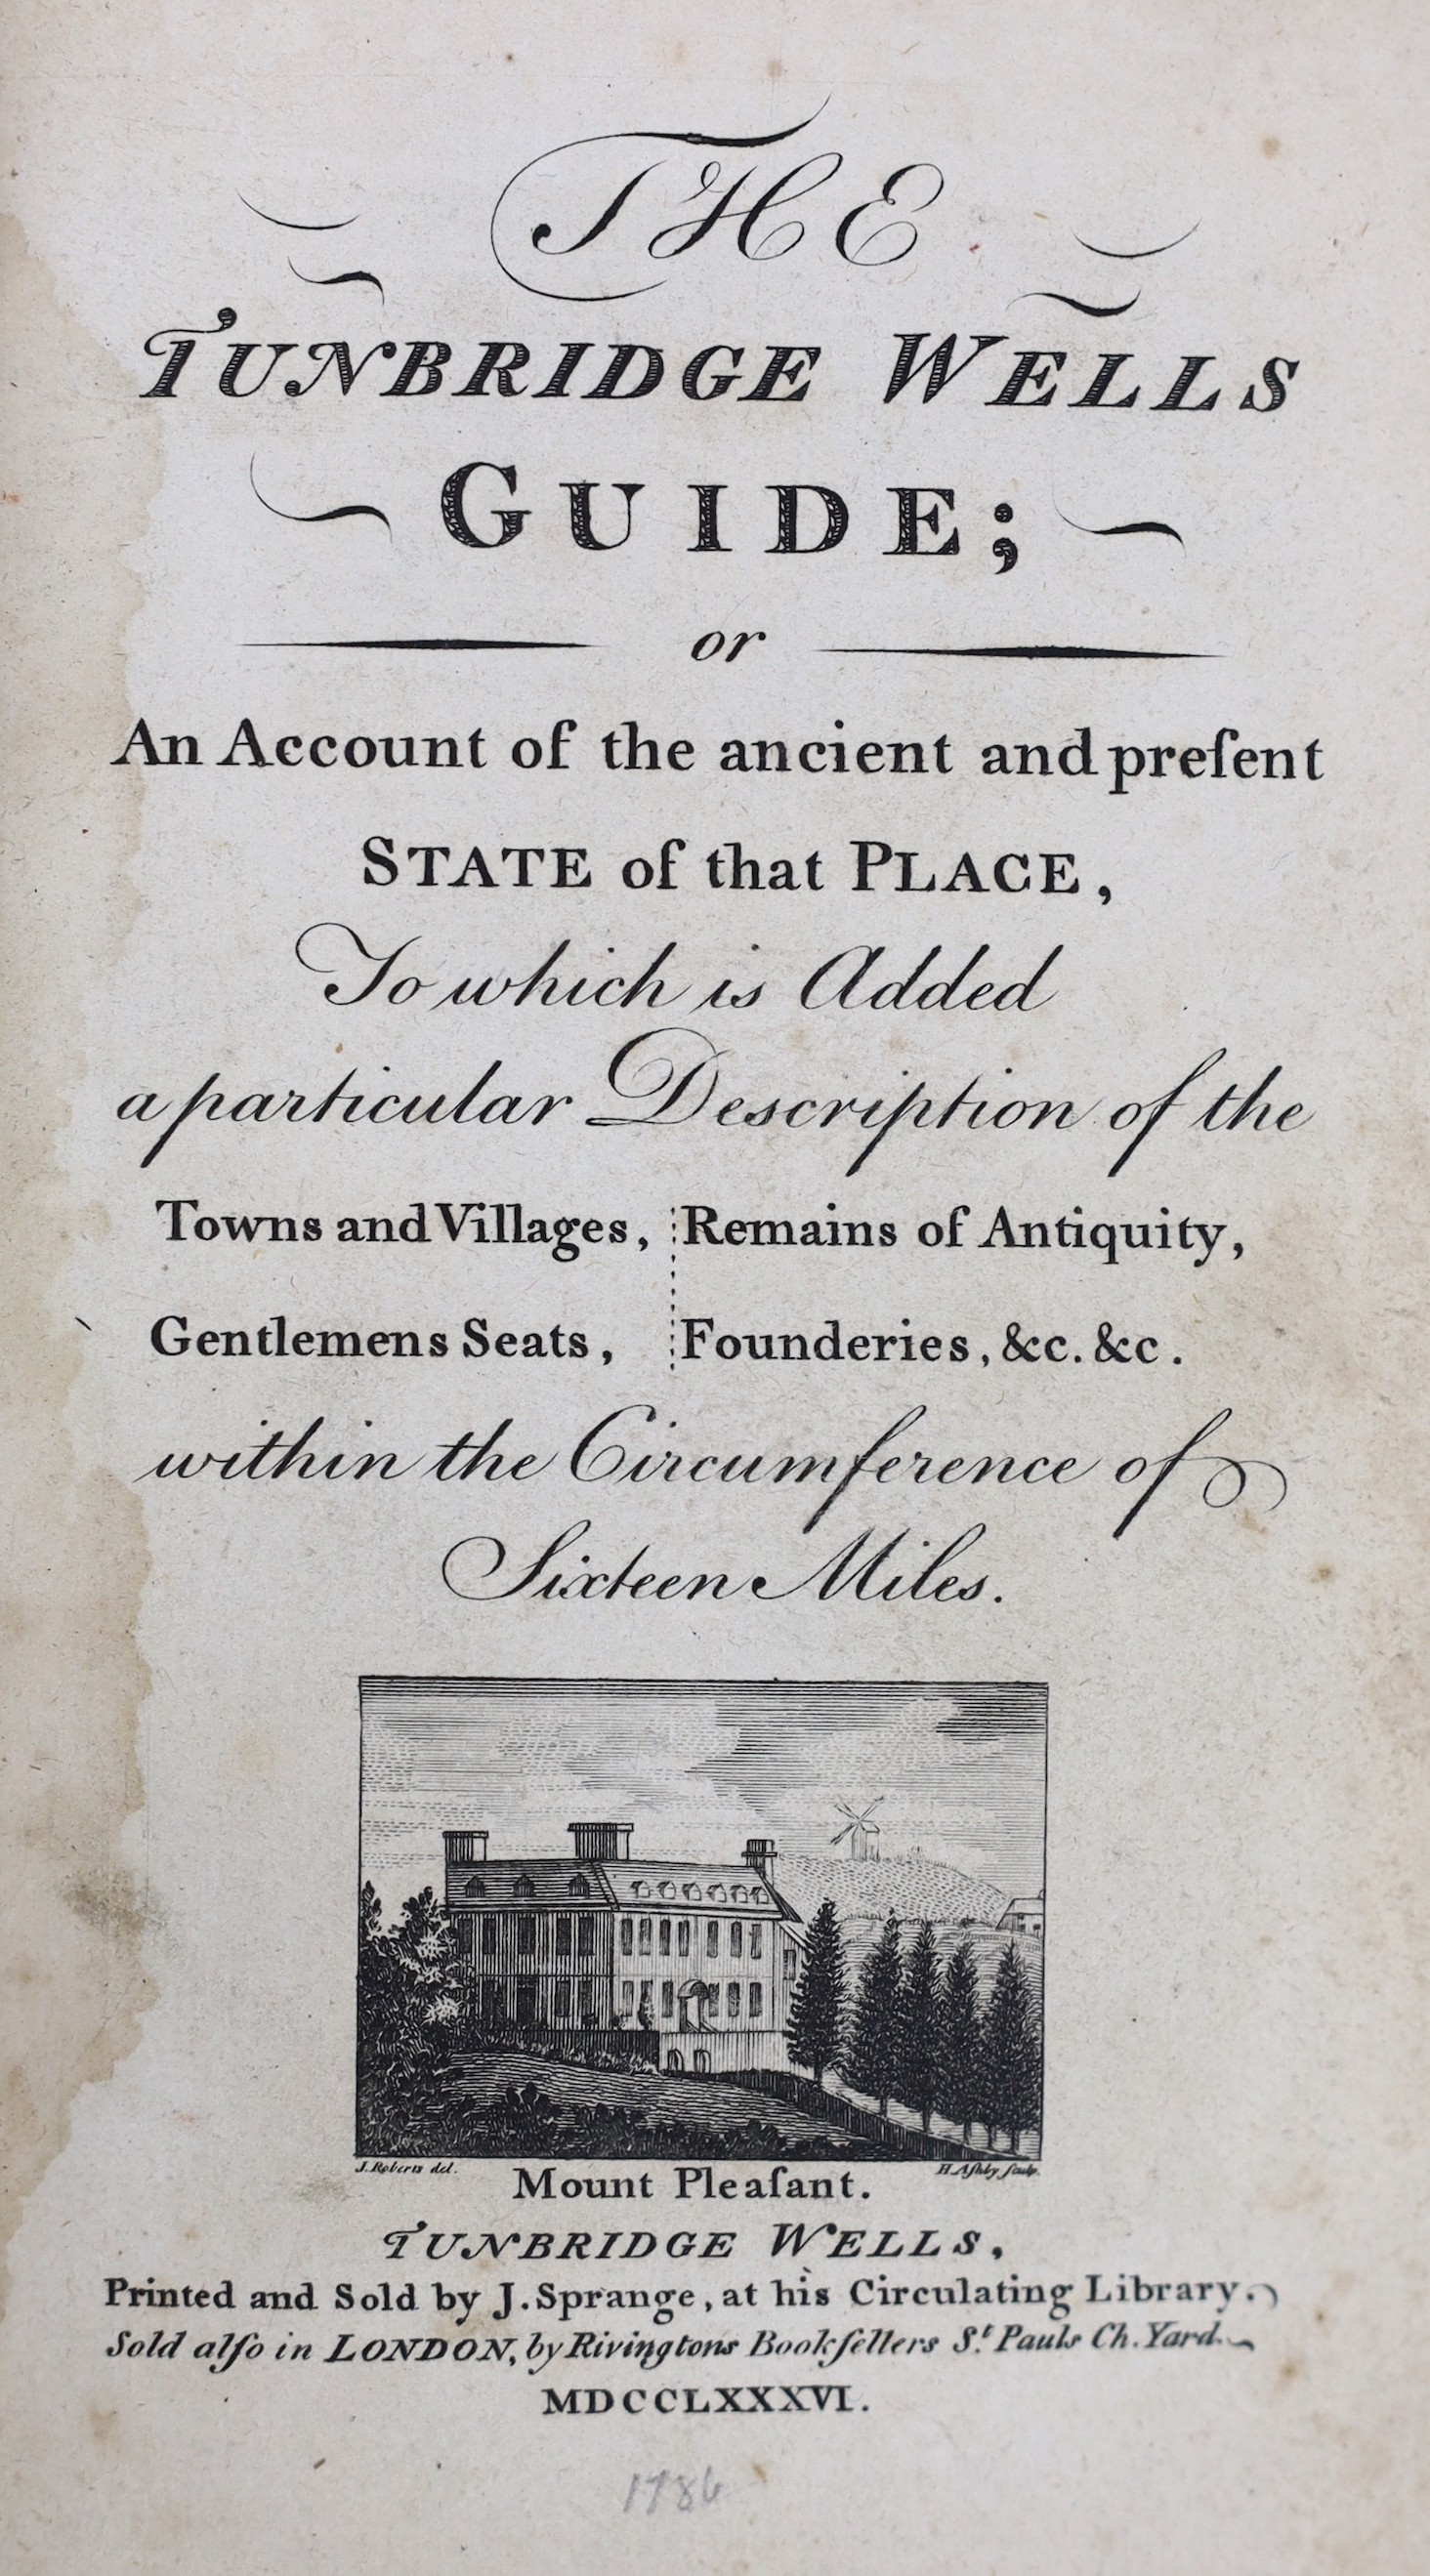 KENT, TUNBRIDGE WELLS: The Tunbridge Wells Guide... to which is added a particular description of the towns and villages, remains of antiquity, gentlemens seats, founderies, &c. within the circumference of sixteen miles.